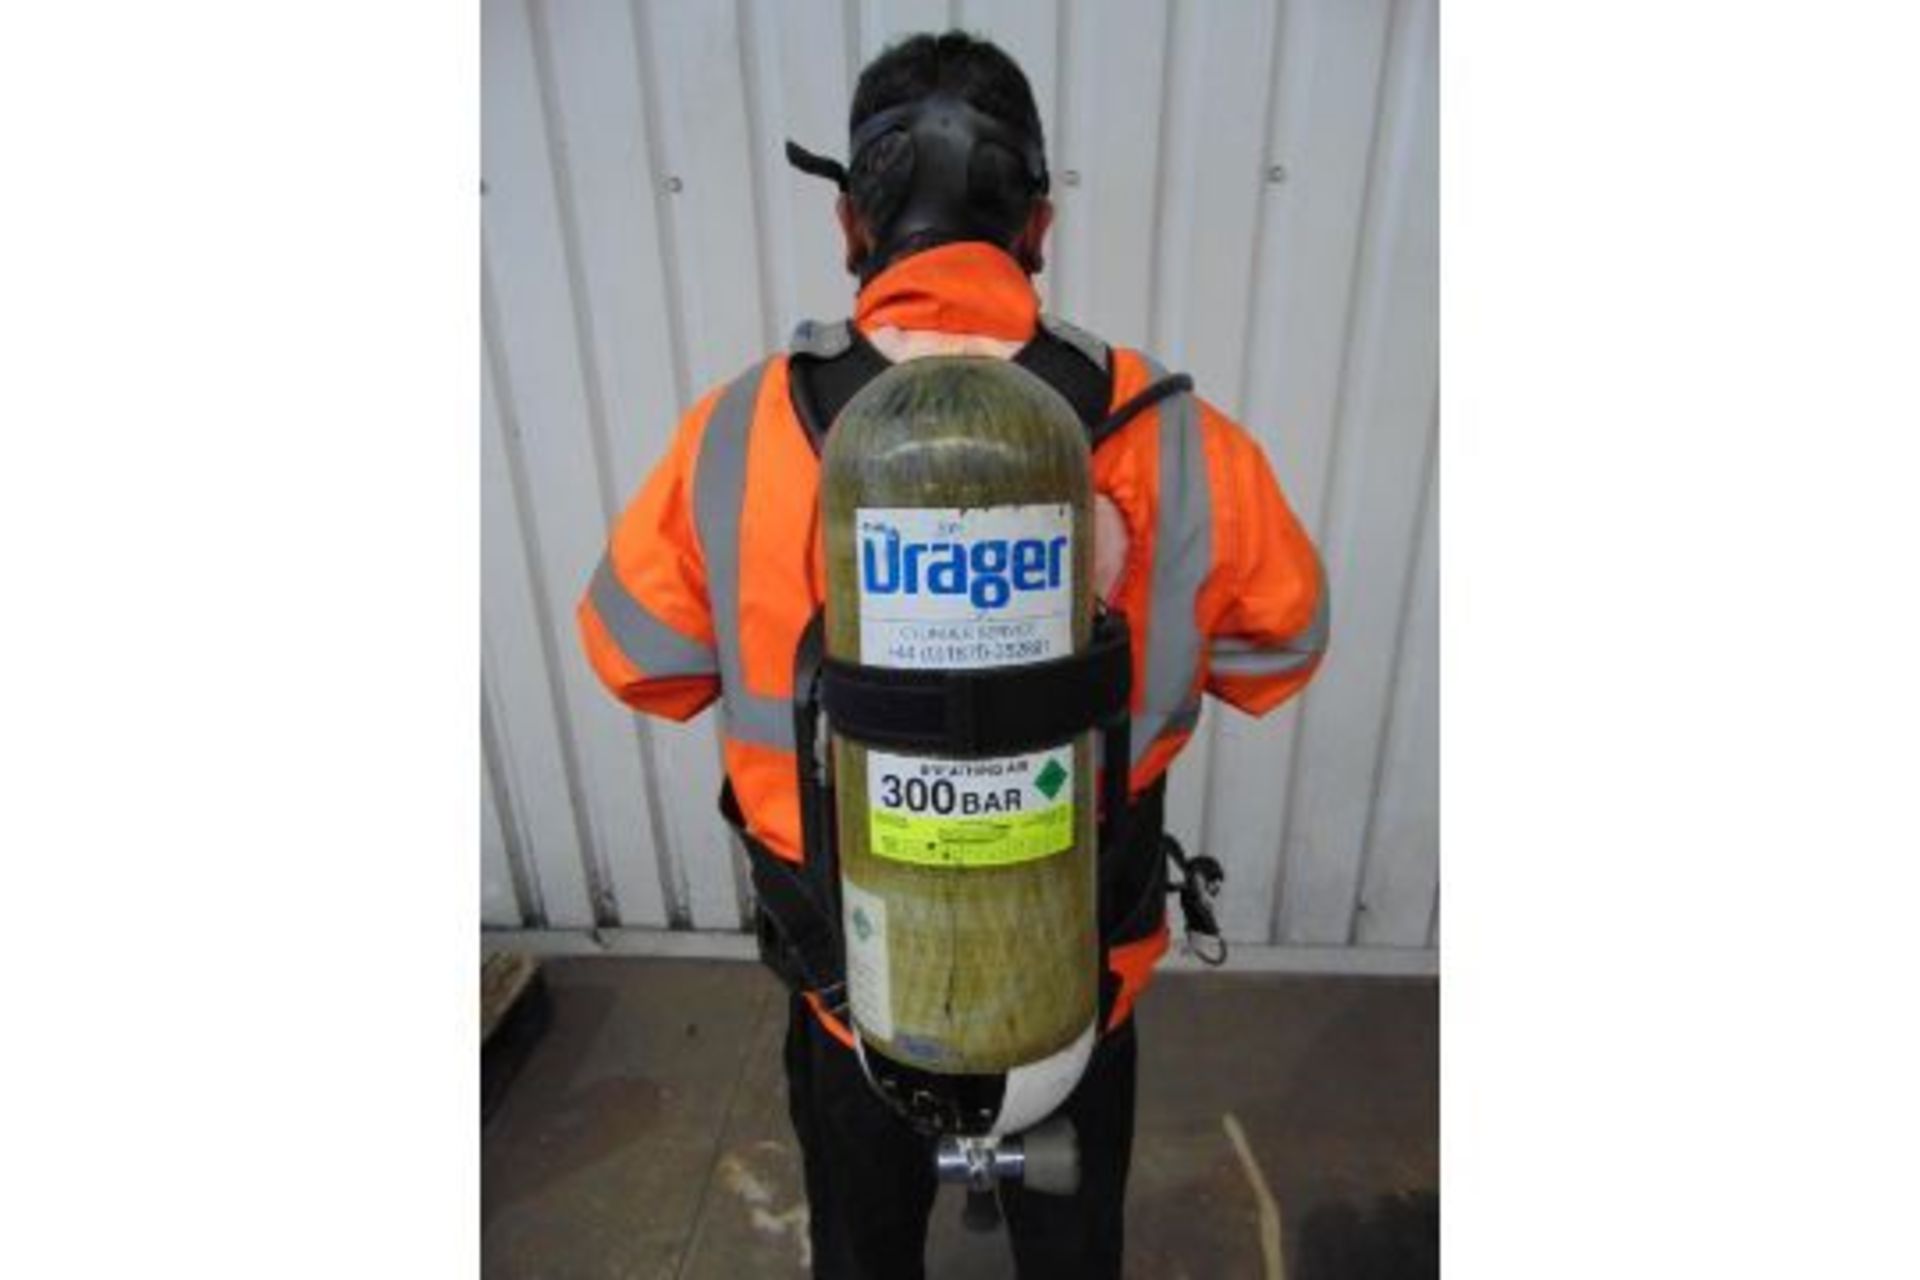 Drager PSS 7000 Self Contained Breathing Apparatus w/ 2 x Drager 300 Bar Air Cylinders - Image 15 of 22